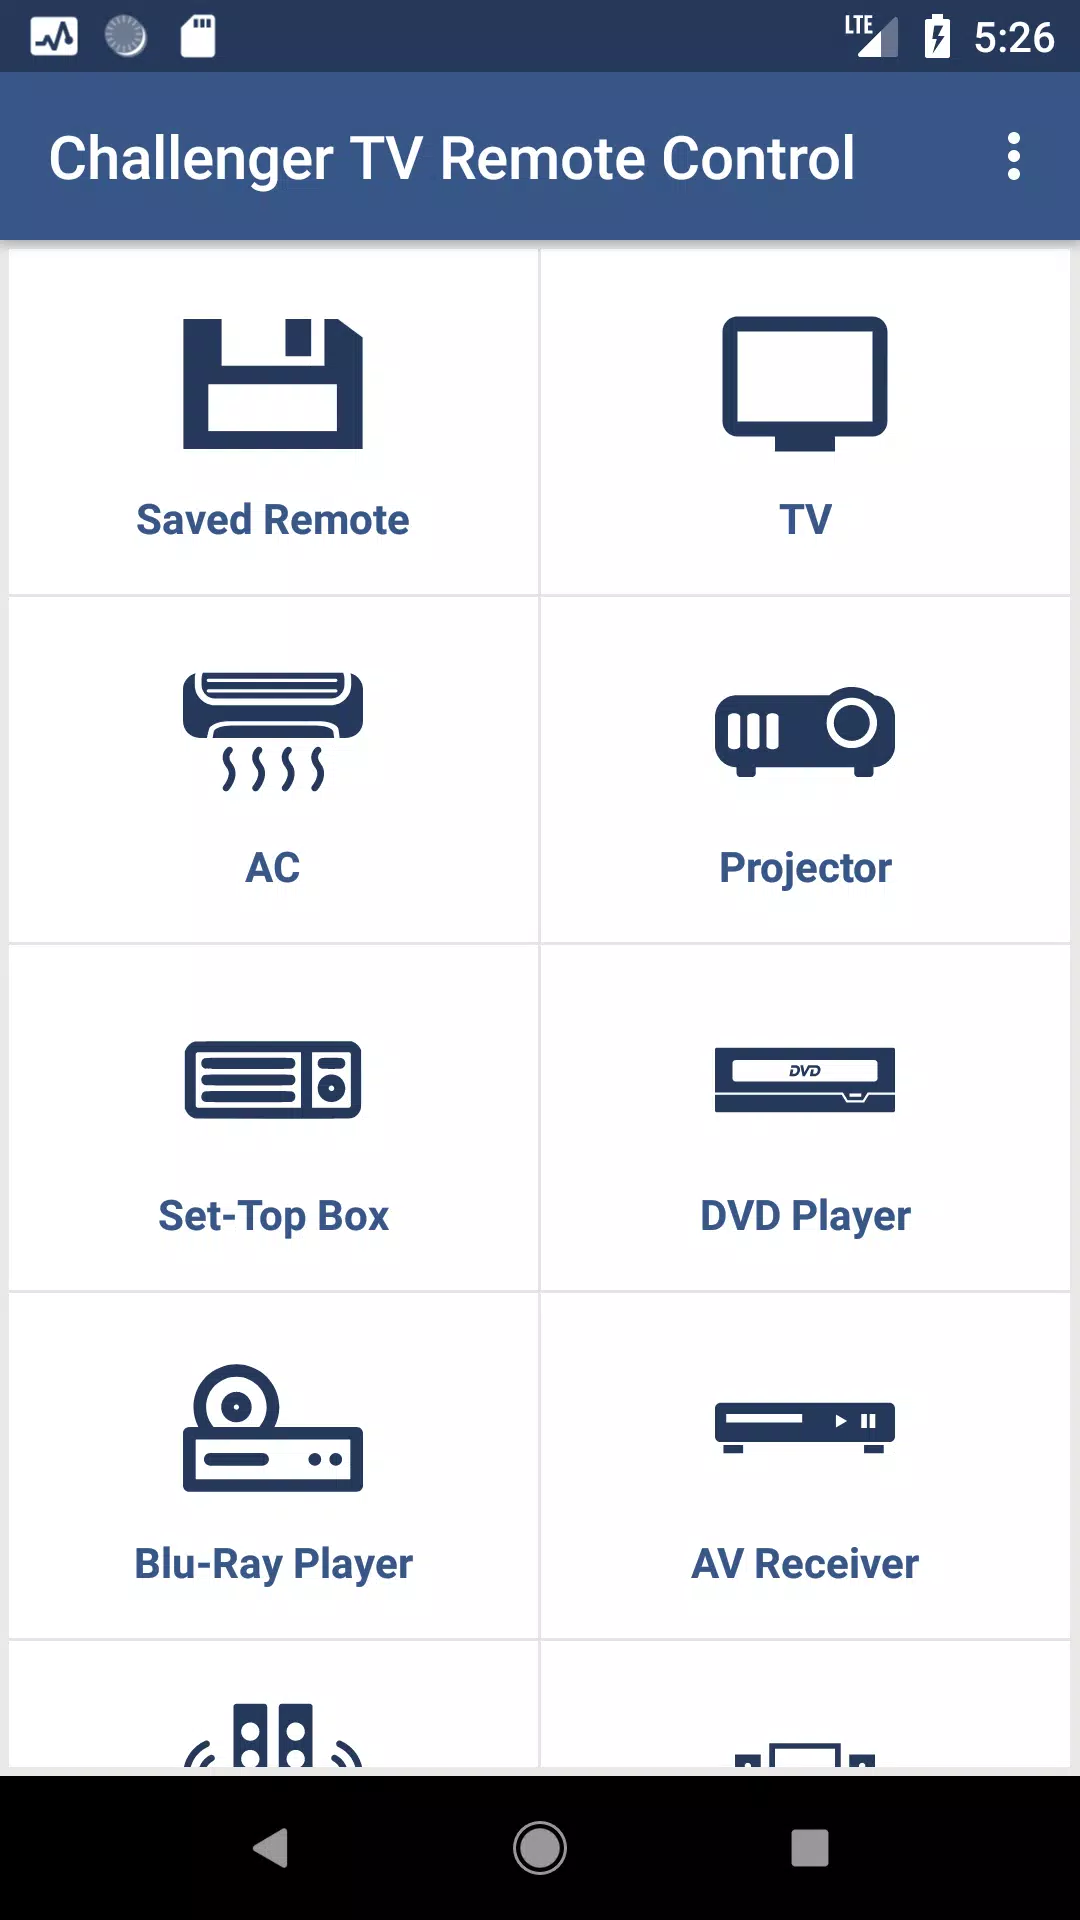 Challenger TV Remote Control for Android - APK Download